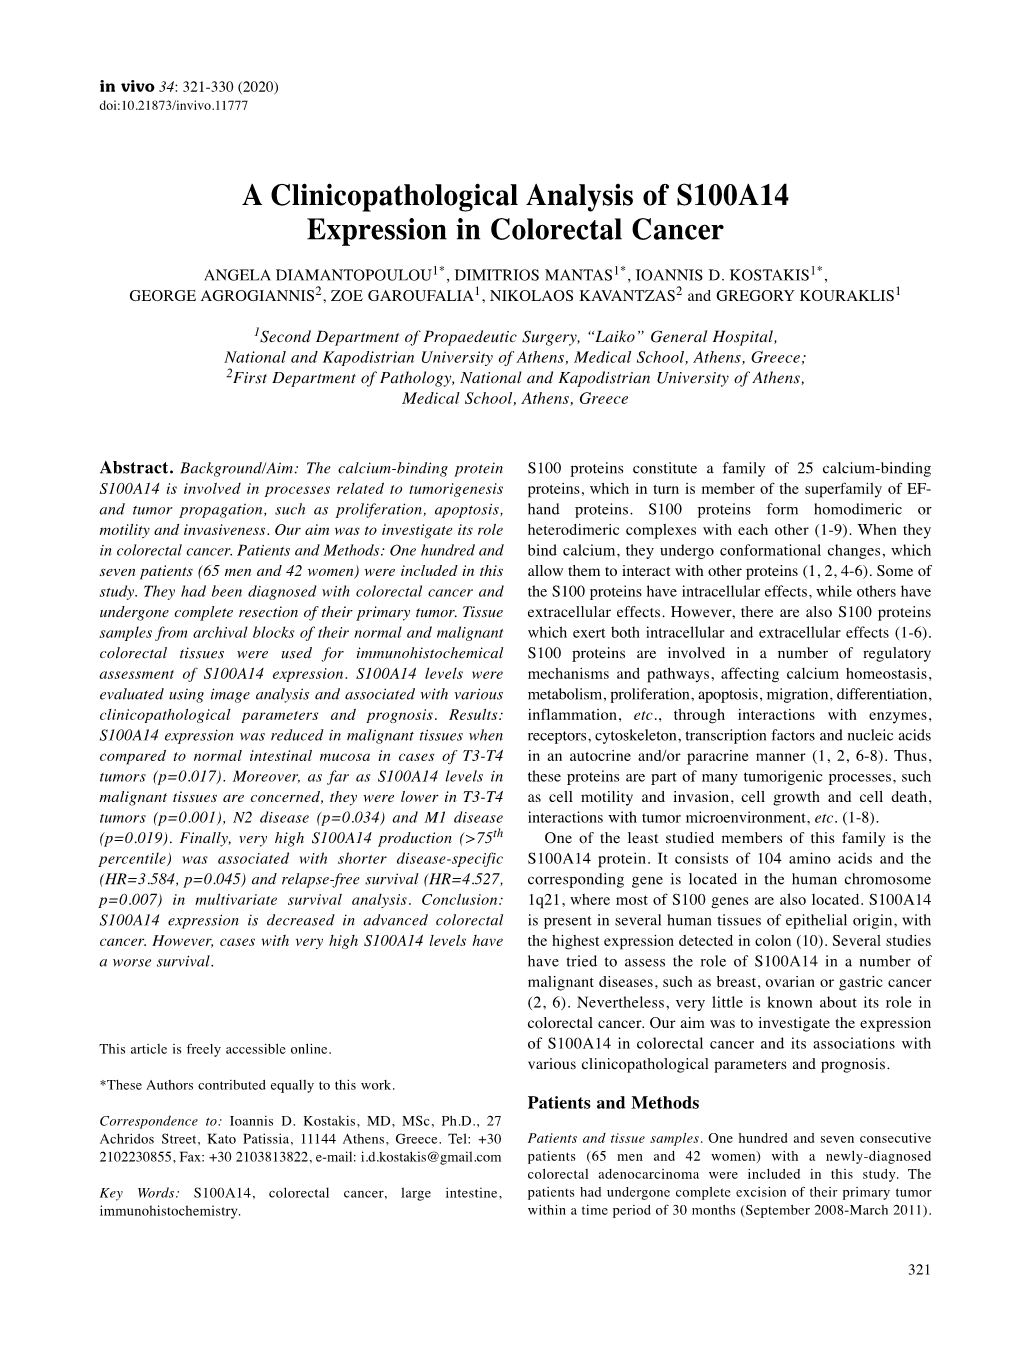 A Clinicopathological Analysis of S100A14 Expression in Colorectal Cancer ANGELA DIAMANTOPOULOU 1* , DIMITRIOS MANTAS 1* , IOANNIS D